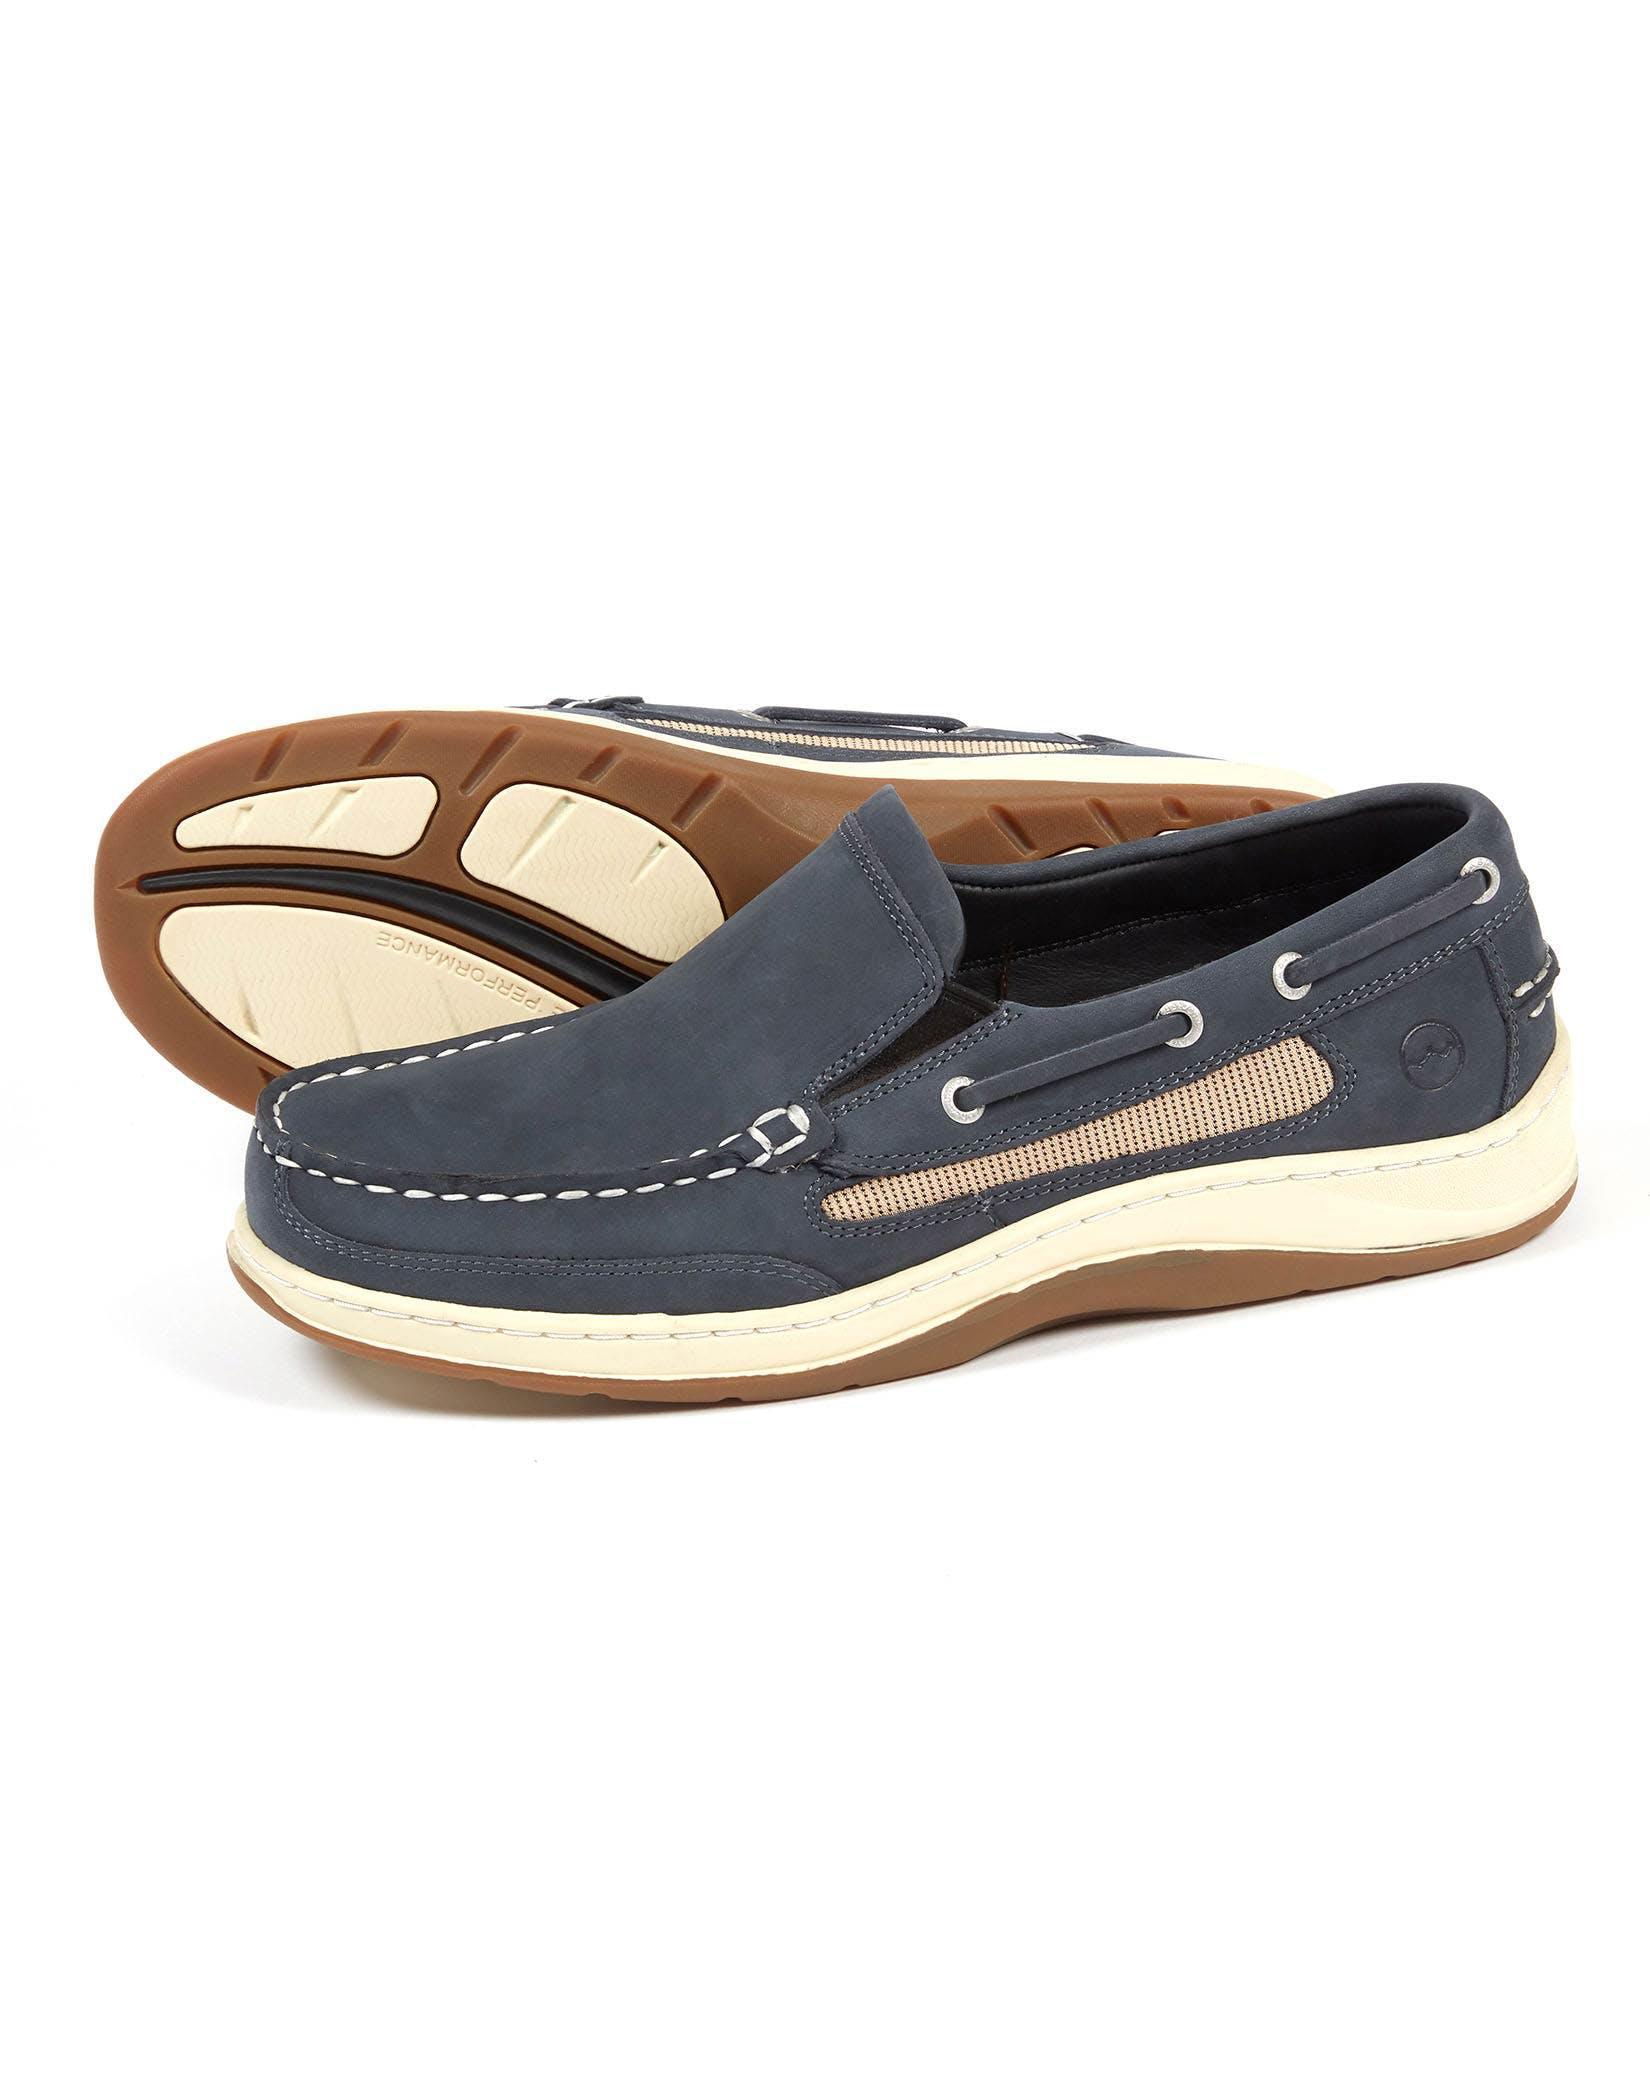 Largs Deck Shoes - Navy